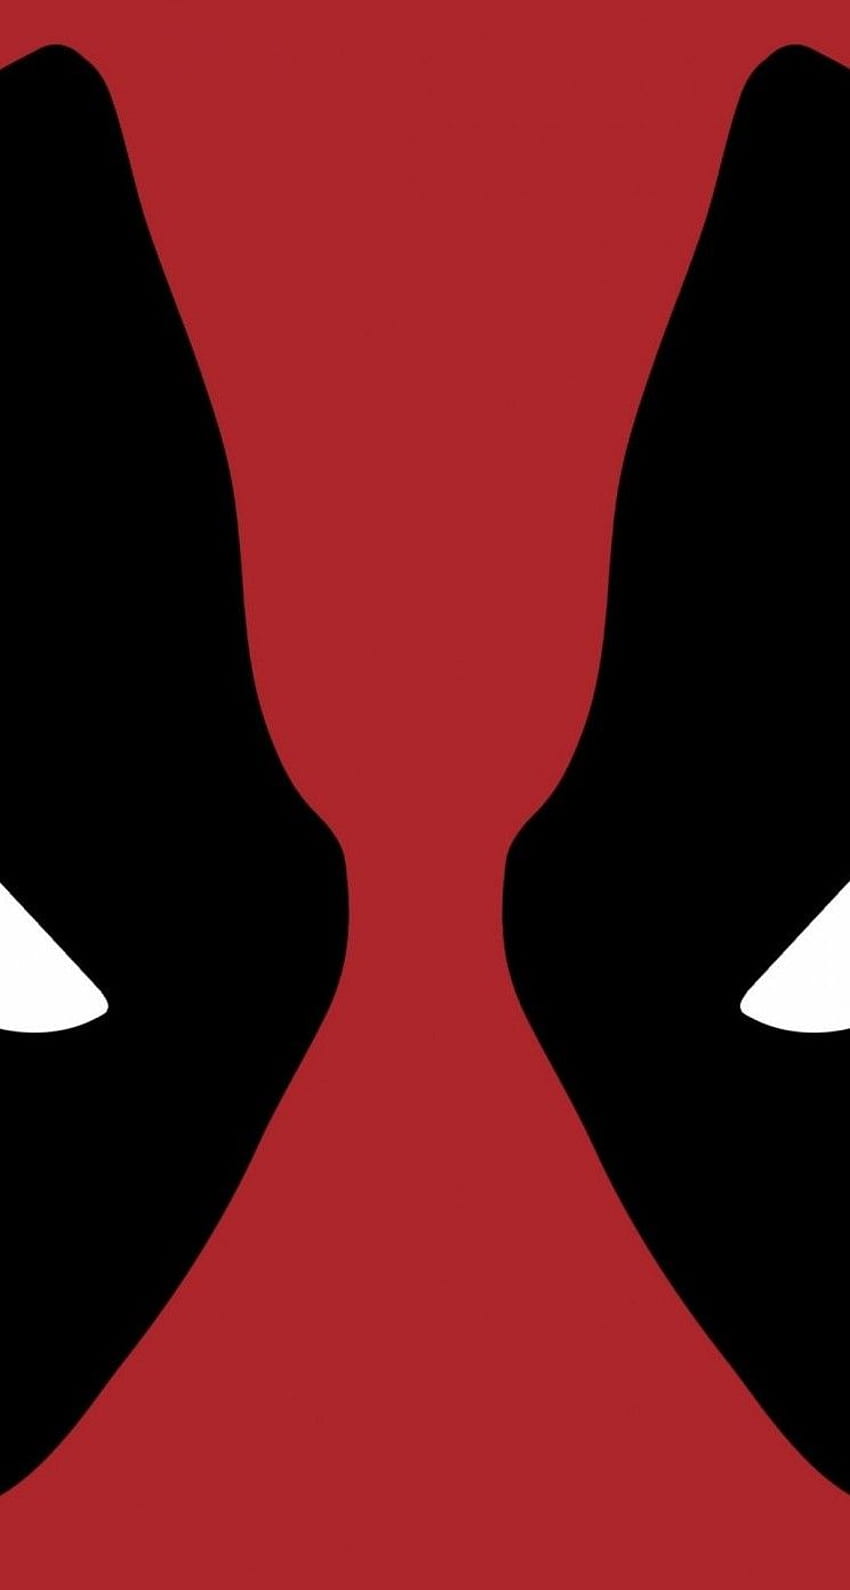 Deadpool for iPhone 5 / 5s / 5c. ., Red 5C HD phone wallpaper